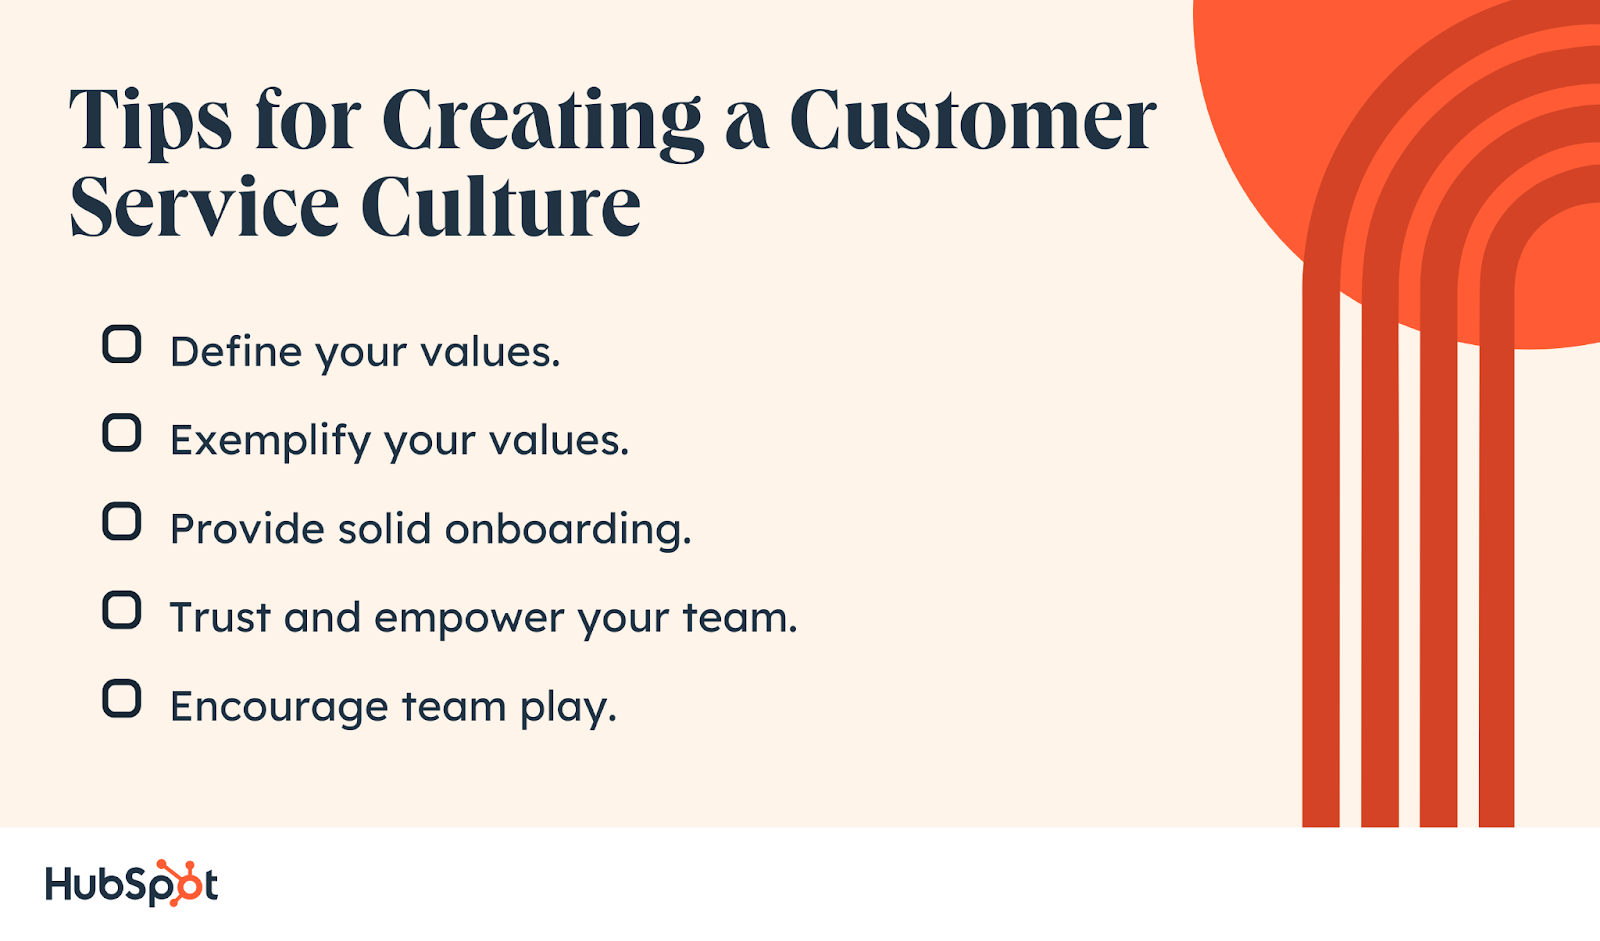 Tips for Creating a Customer Service Culture.  Define your values. Exemplify your values. Provide solid onboarding. Trust and empower your team. Encourage team play.